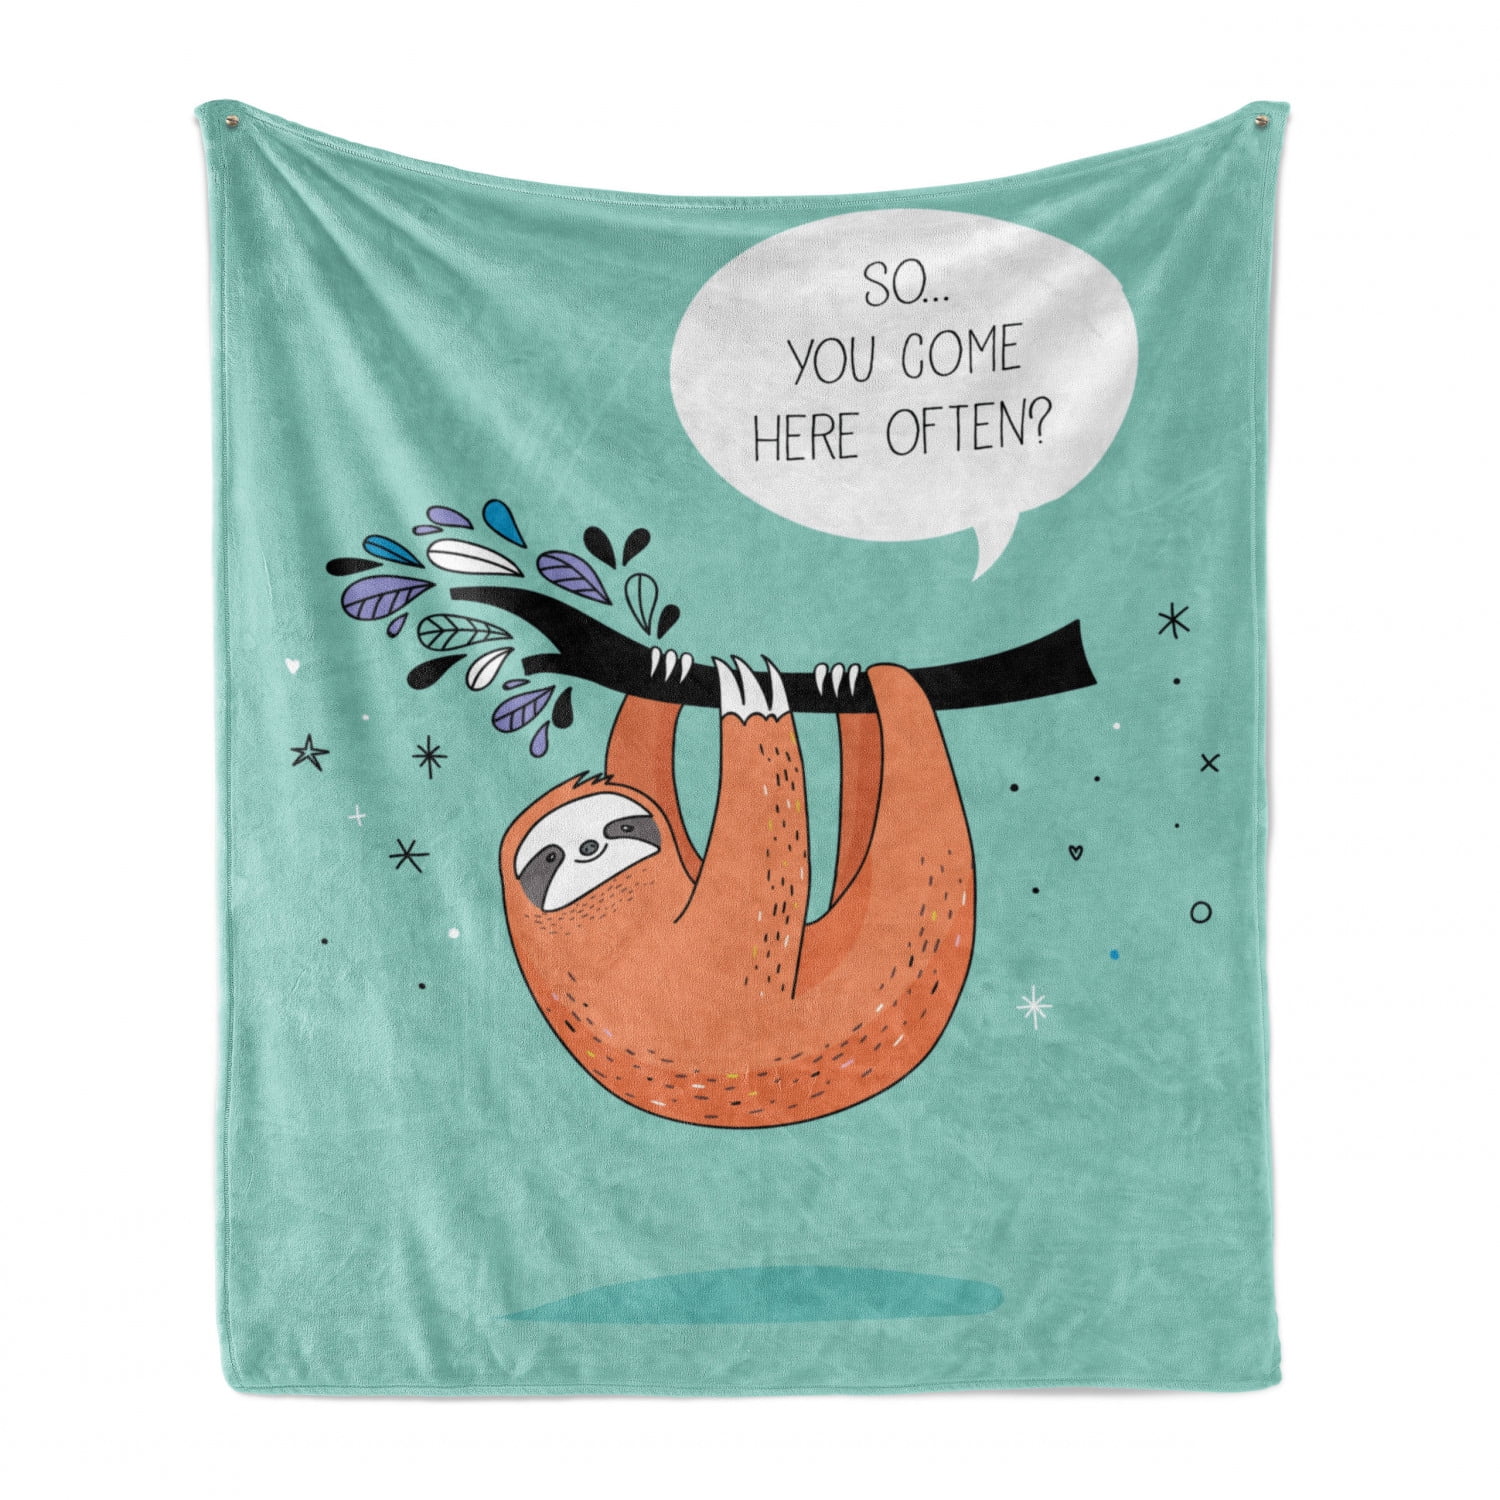 Flannel Fleece Blanket Full Size Cute Sloths Tropical Leaves Stars Blanket,All-Season Plush Blanket for Couch Bed Travelling Camping Or Kids Adults 60X50